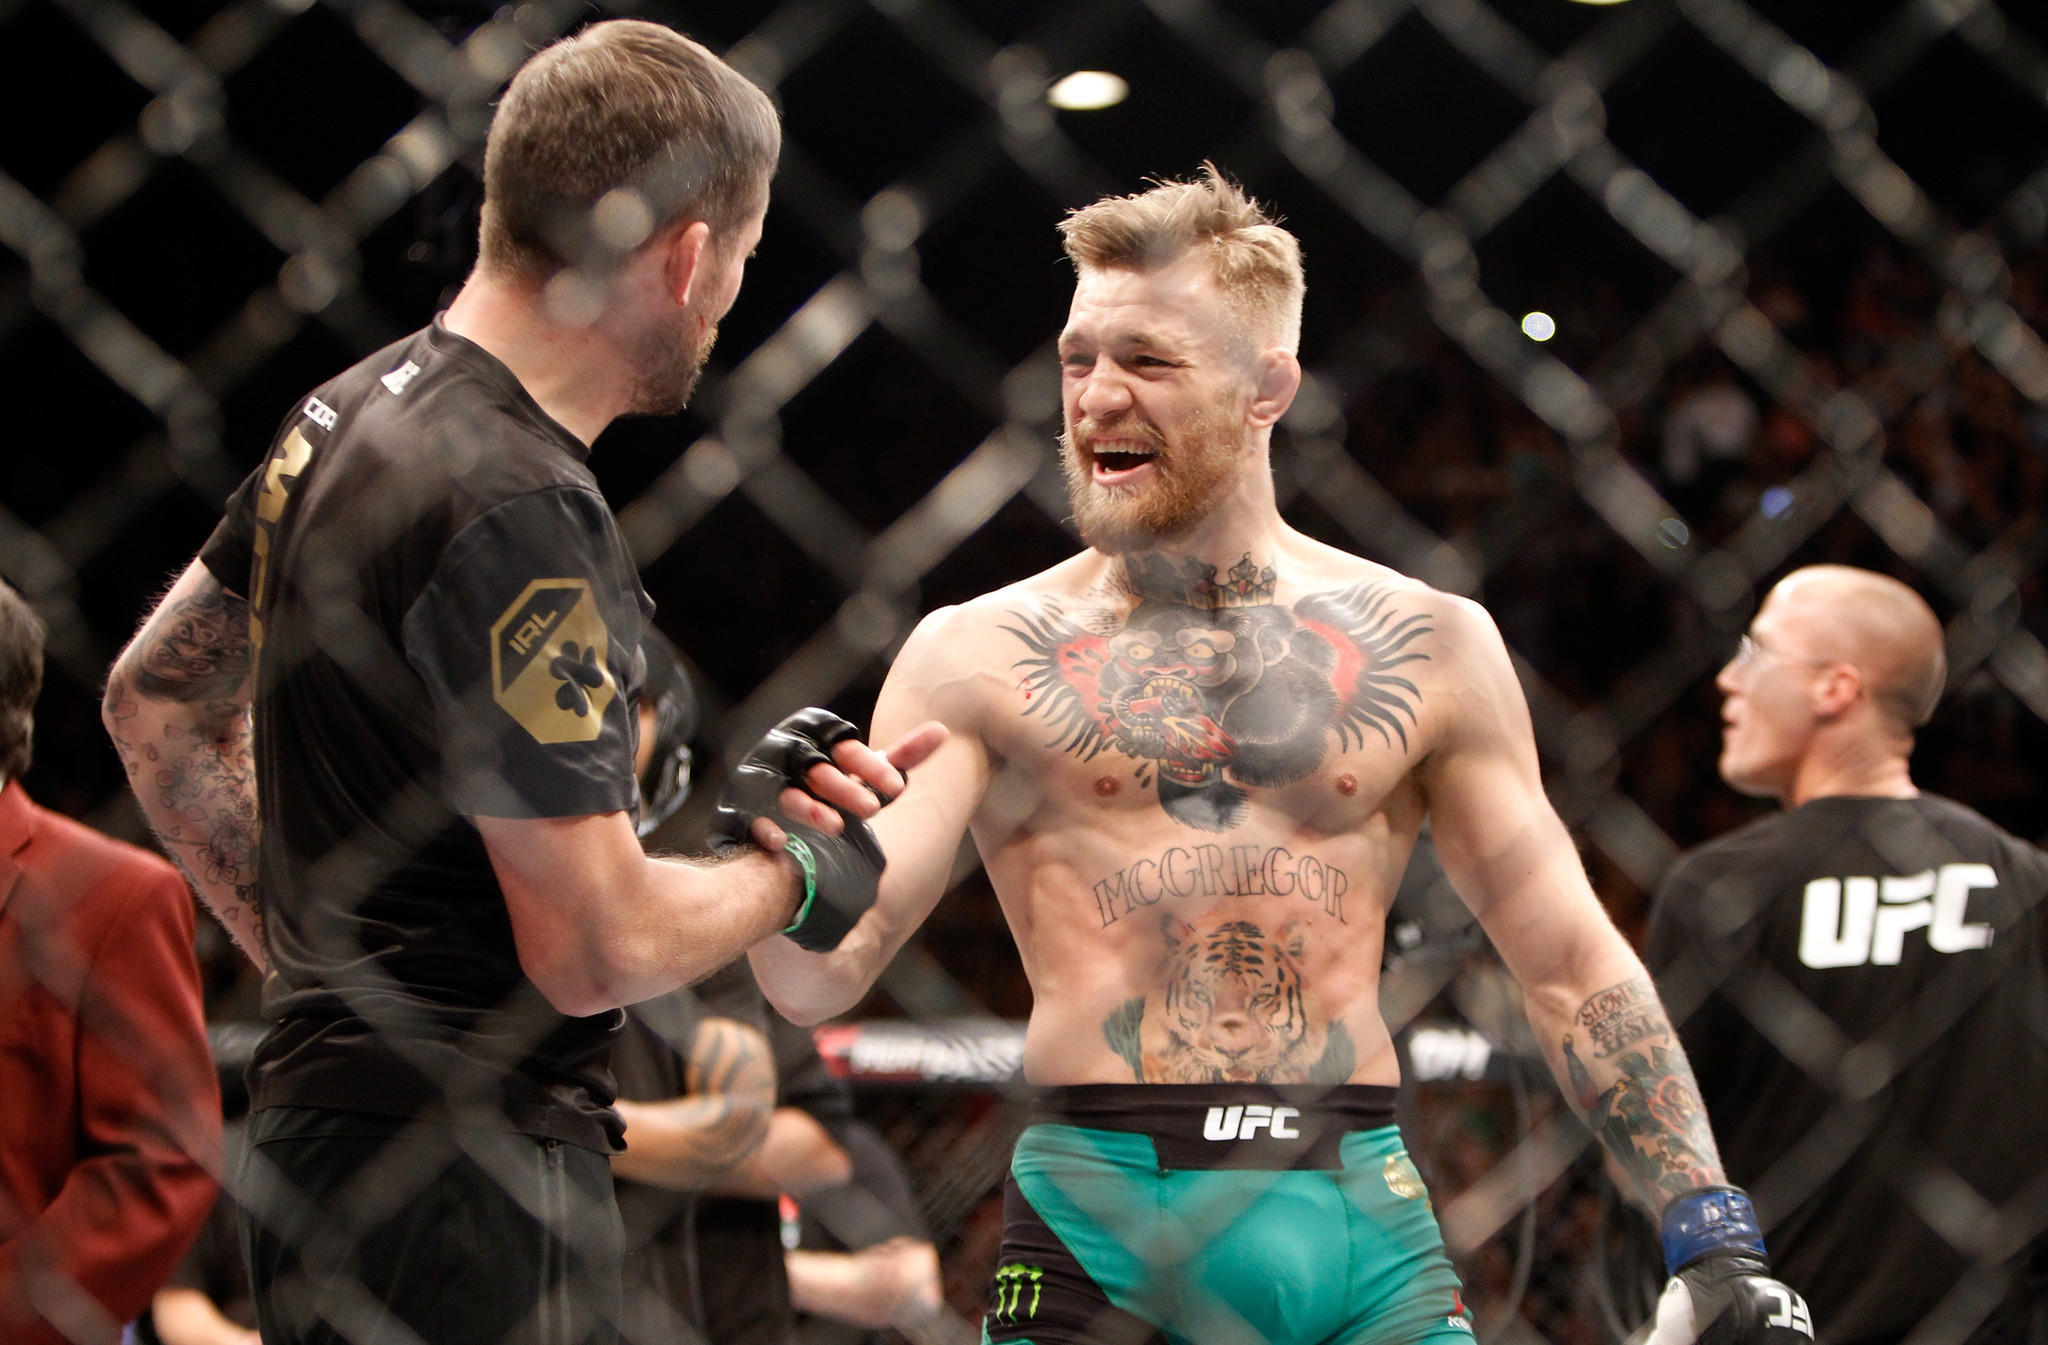 Conor McGregor has options in next fight after record knockout of Jose Aldo - LA Times2048 x 1345